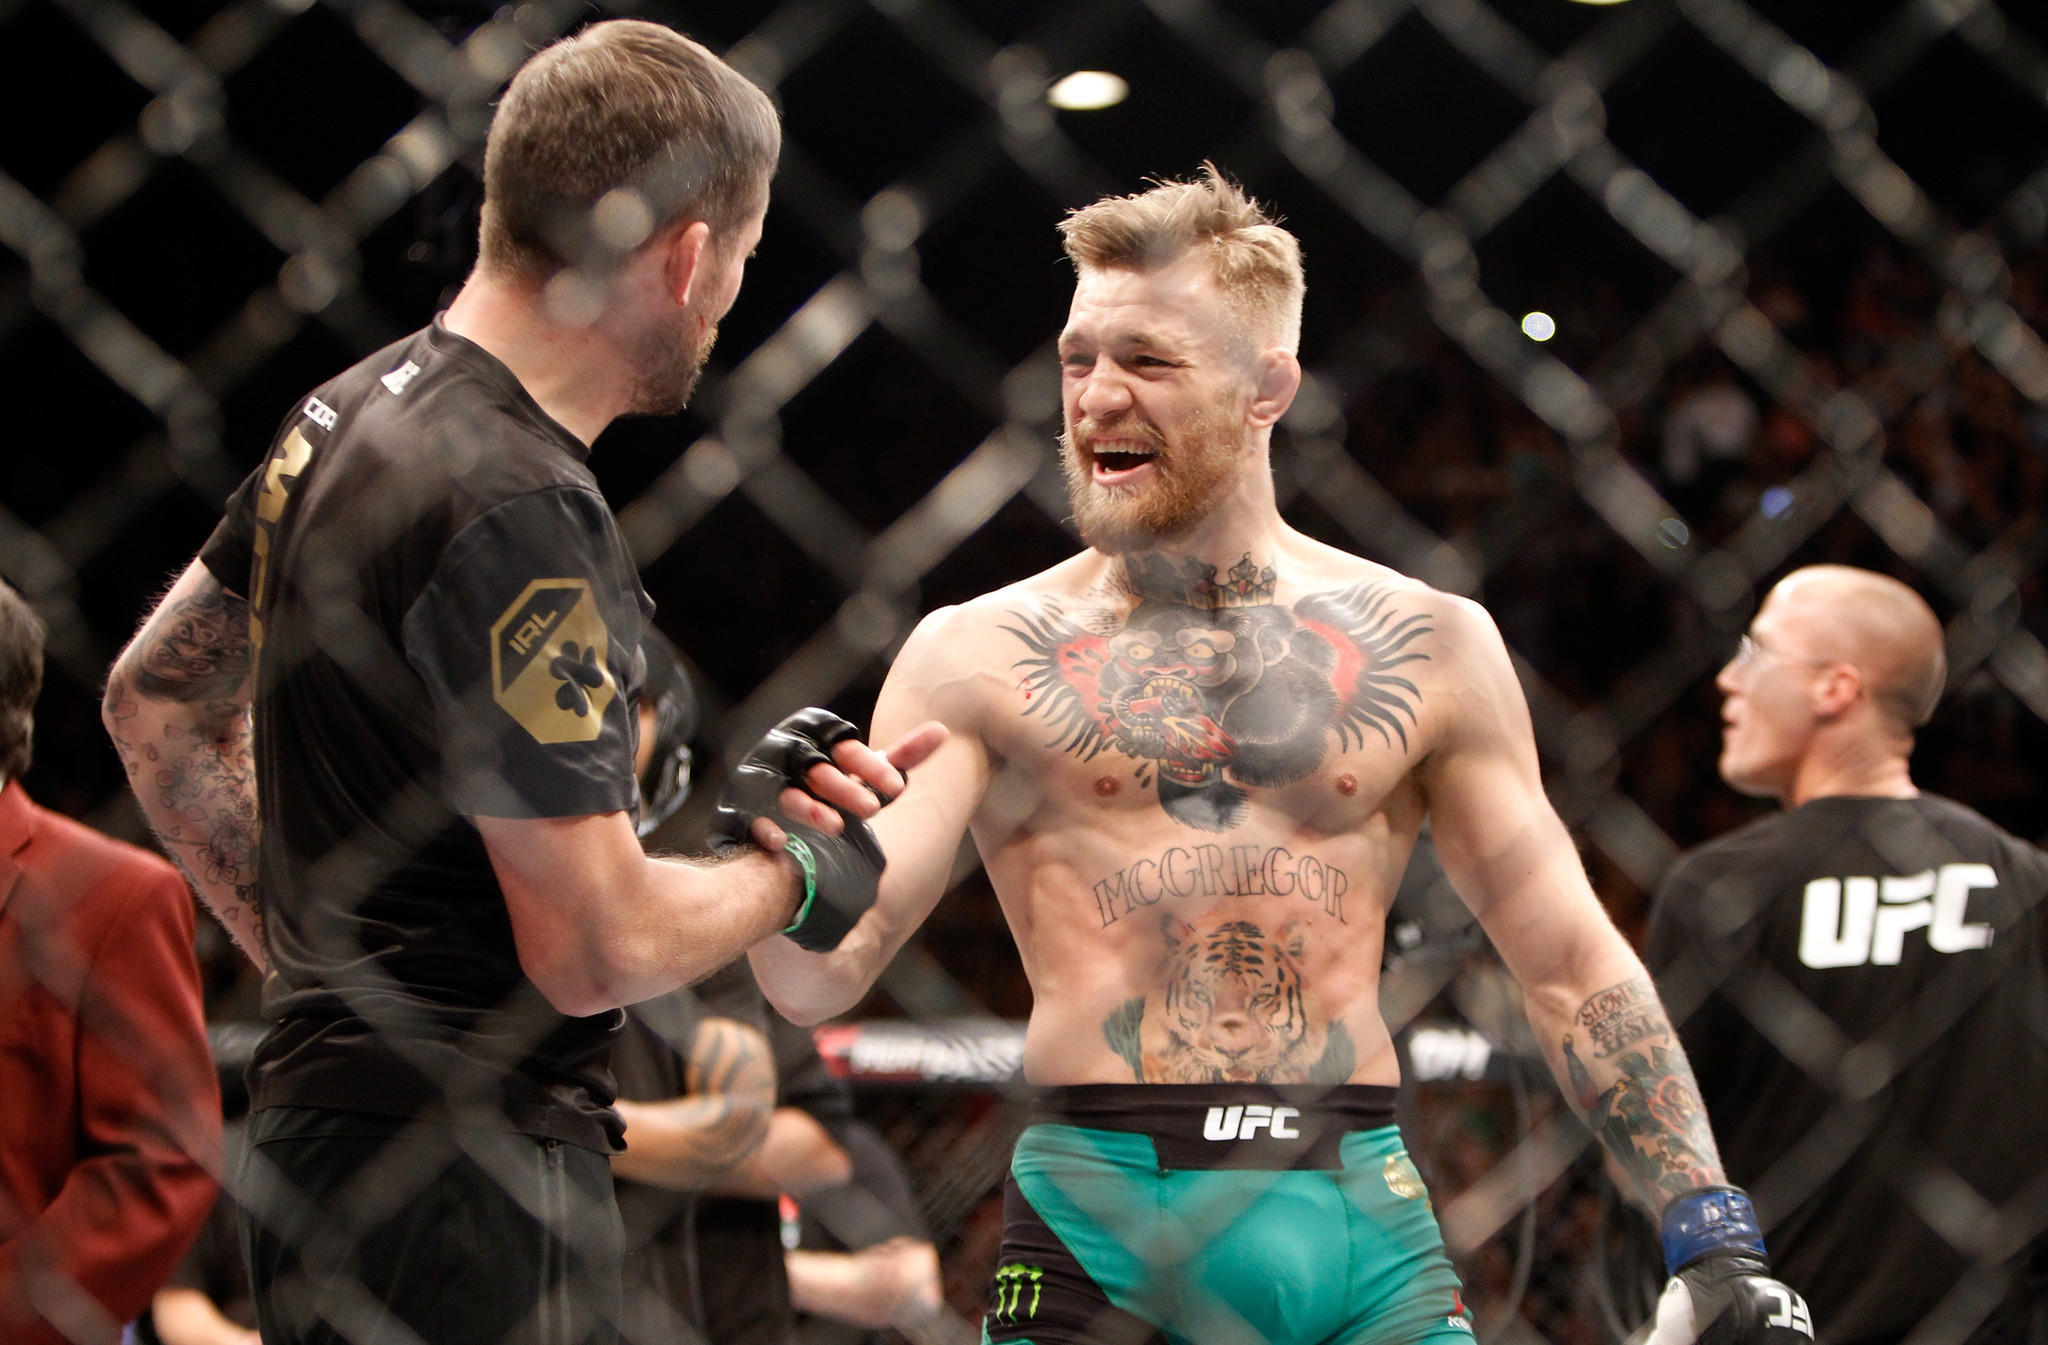 Conor McGregor has options in next fight after record knockout of Jose Aldo - LA Times2048 x 1345